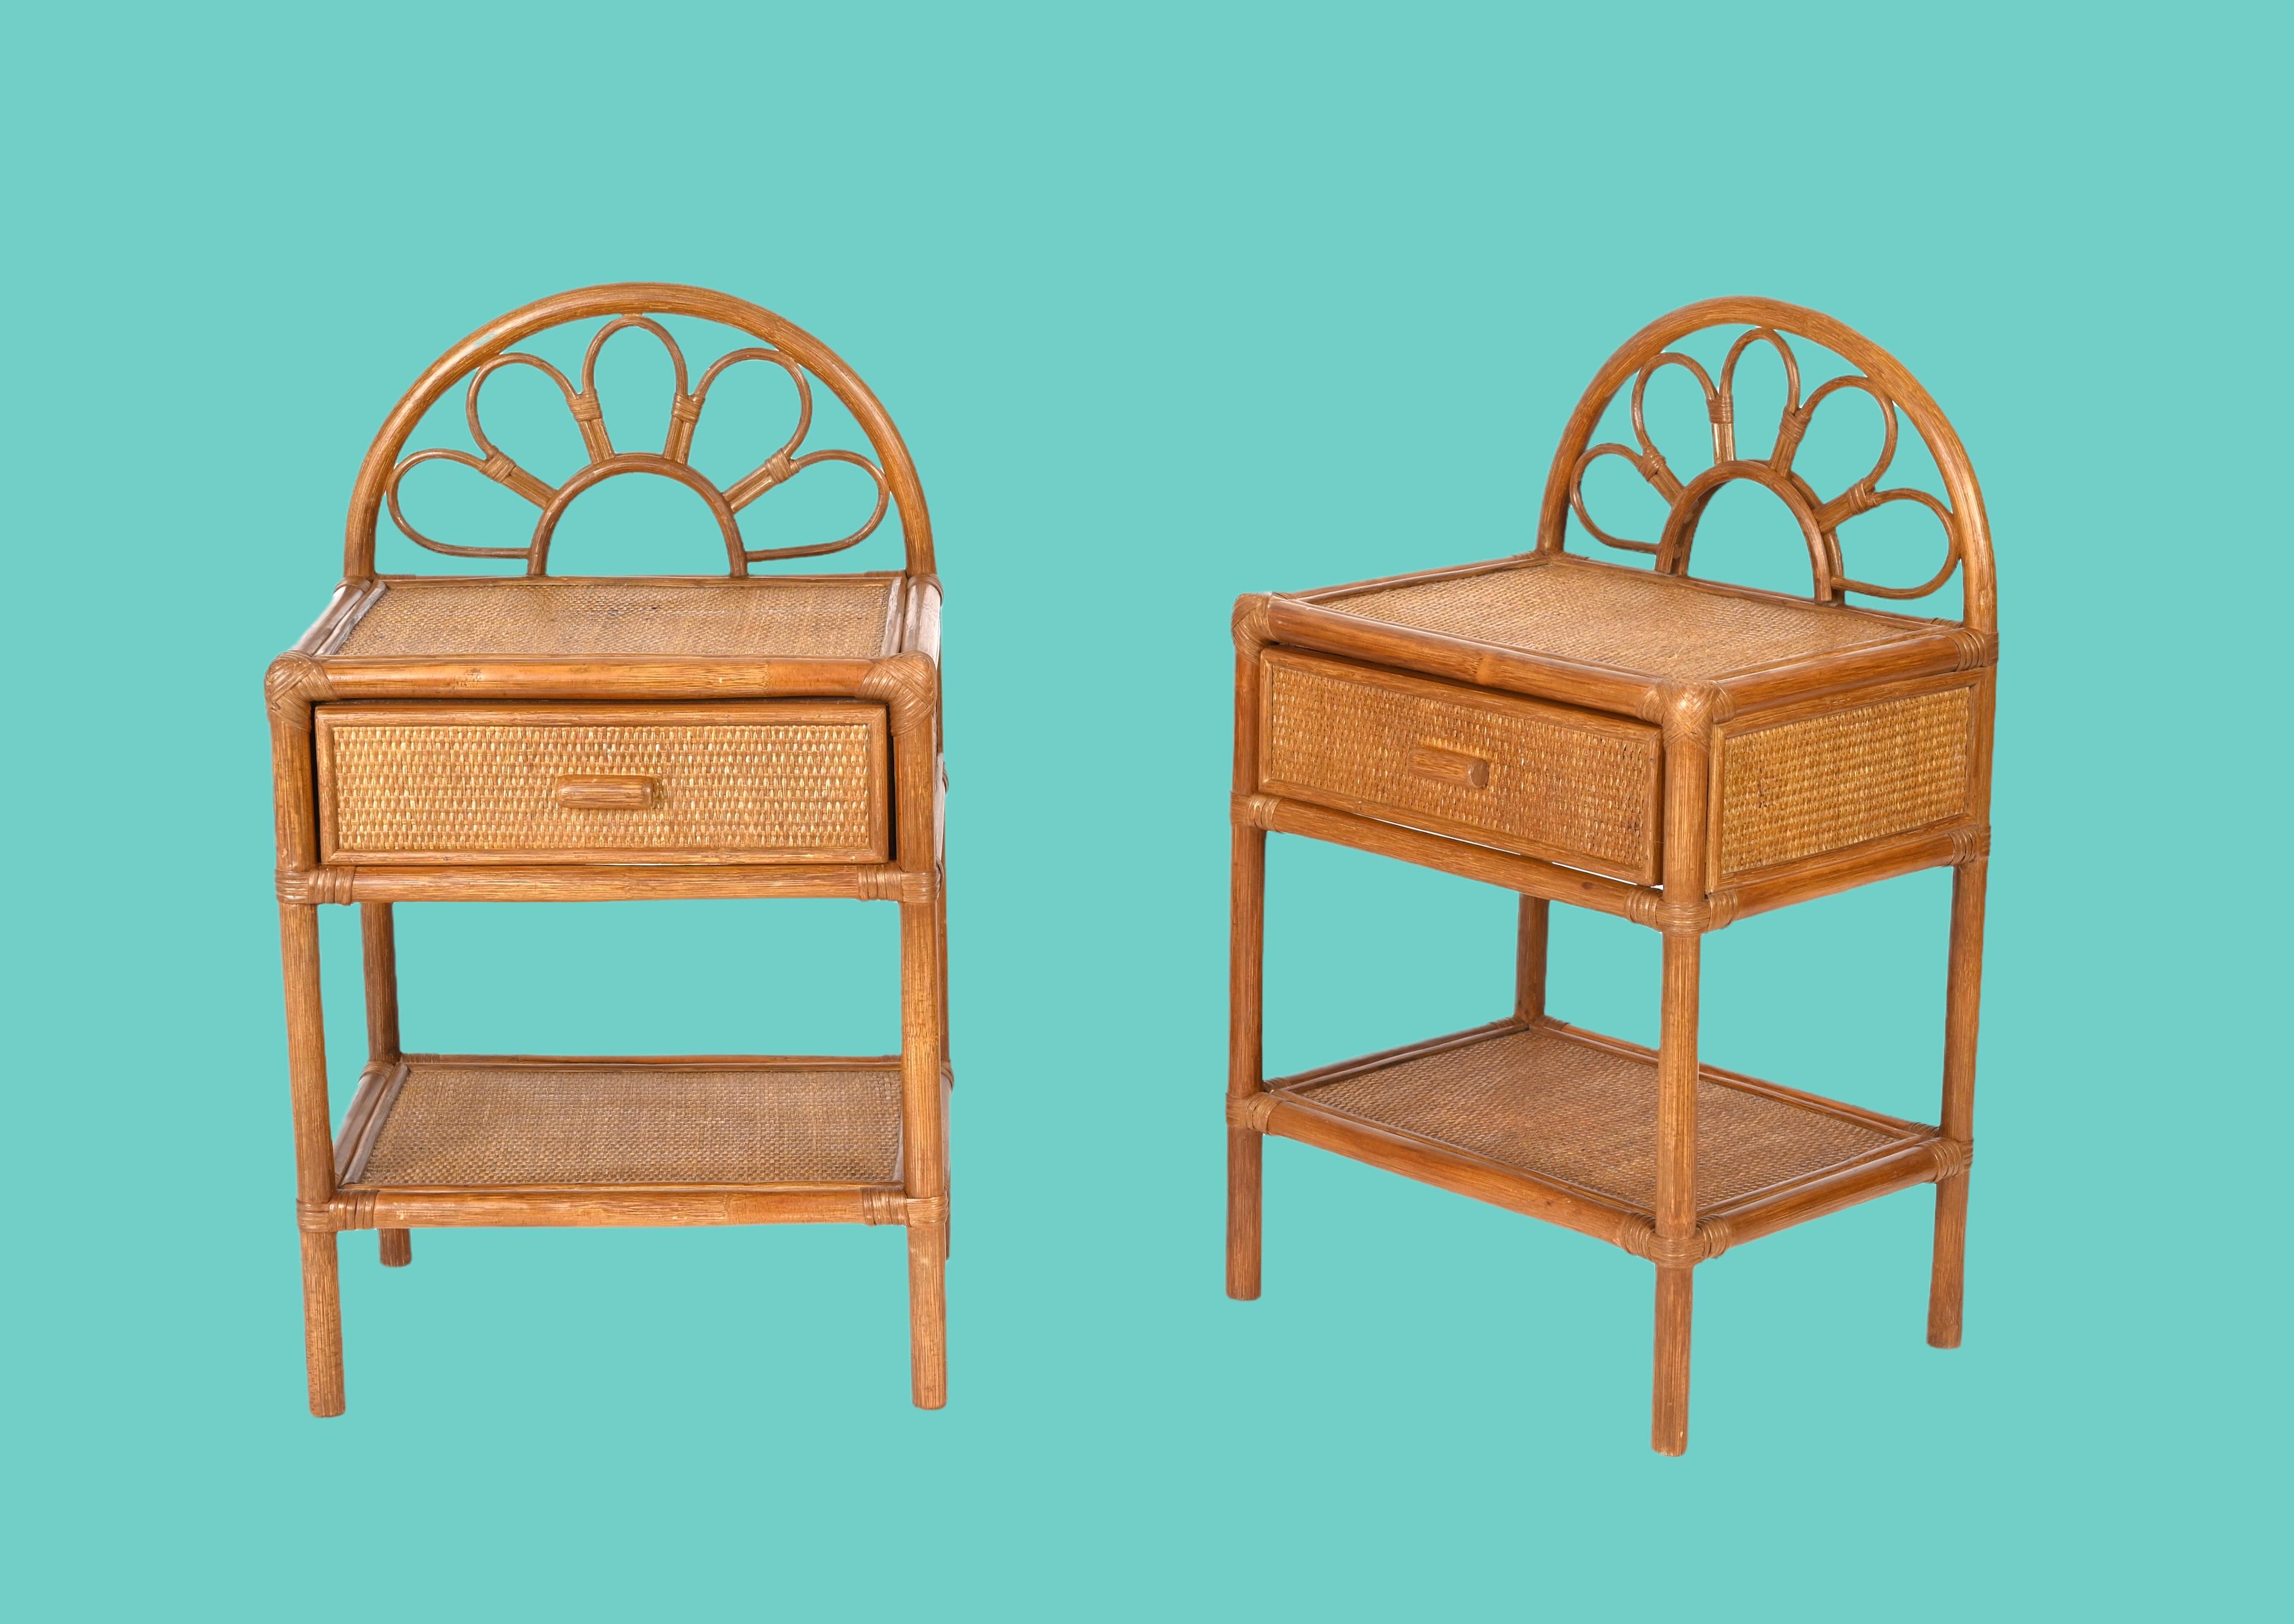 Pair of Mid-Century Modern Bamboo Cane and Rattan Italian Bedside Tables, 1970s 2